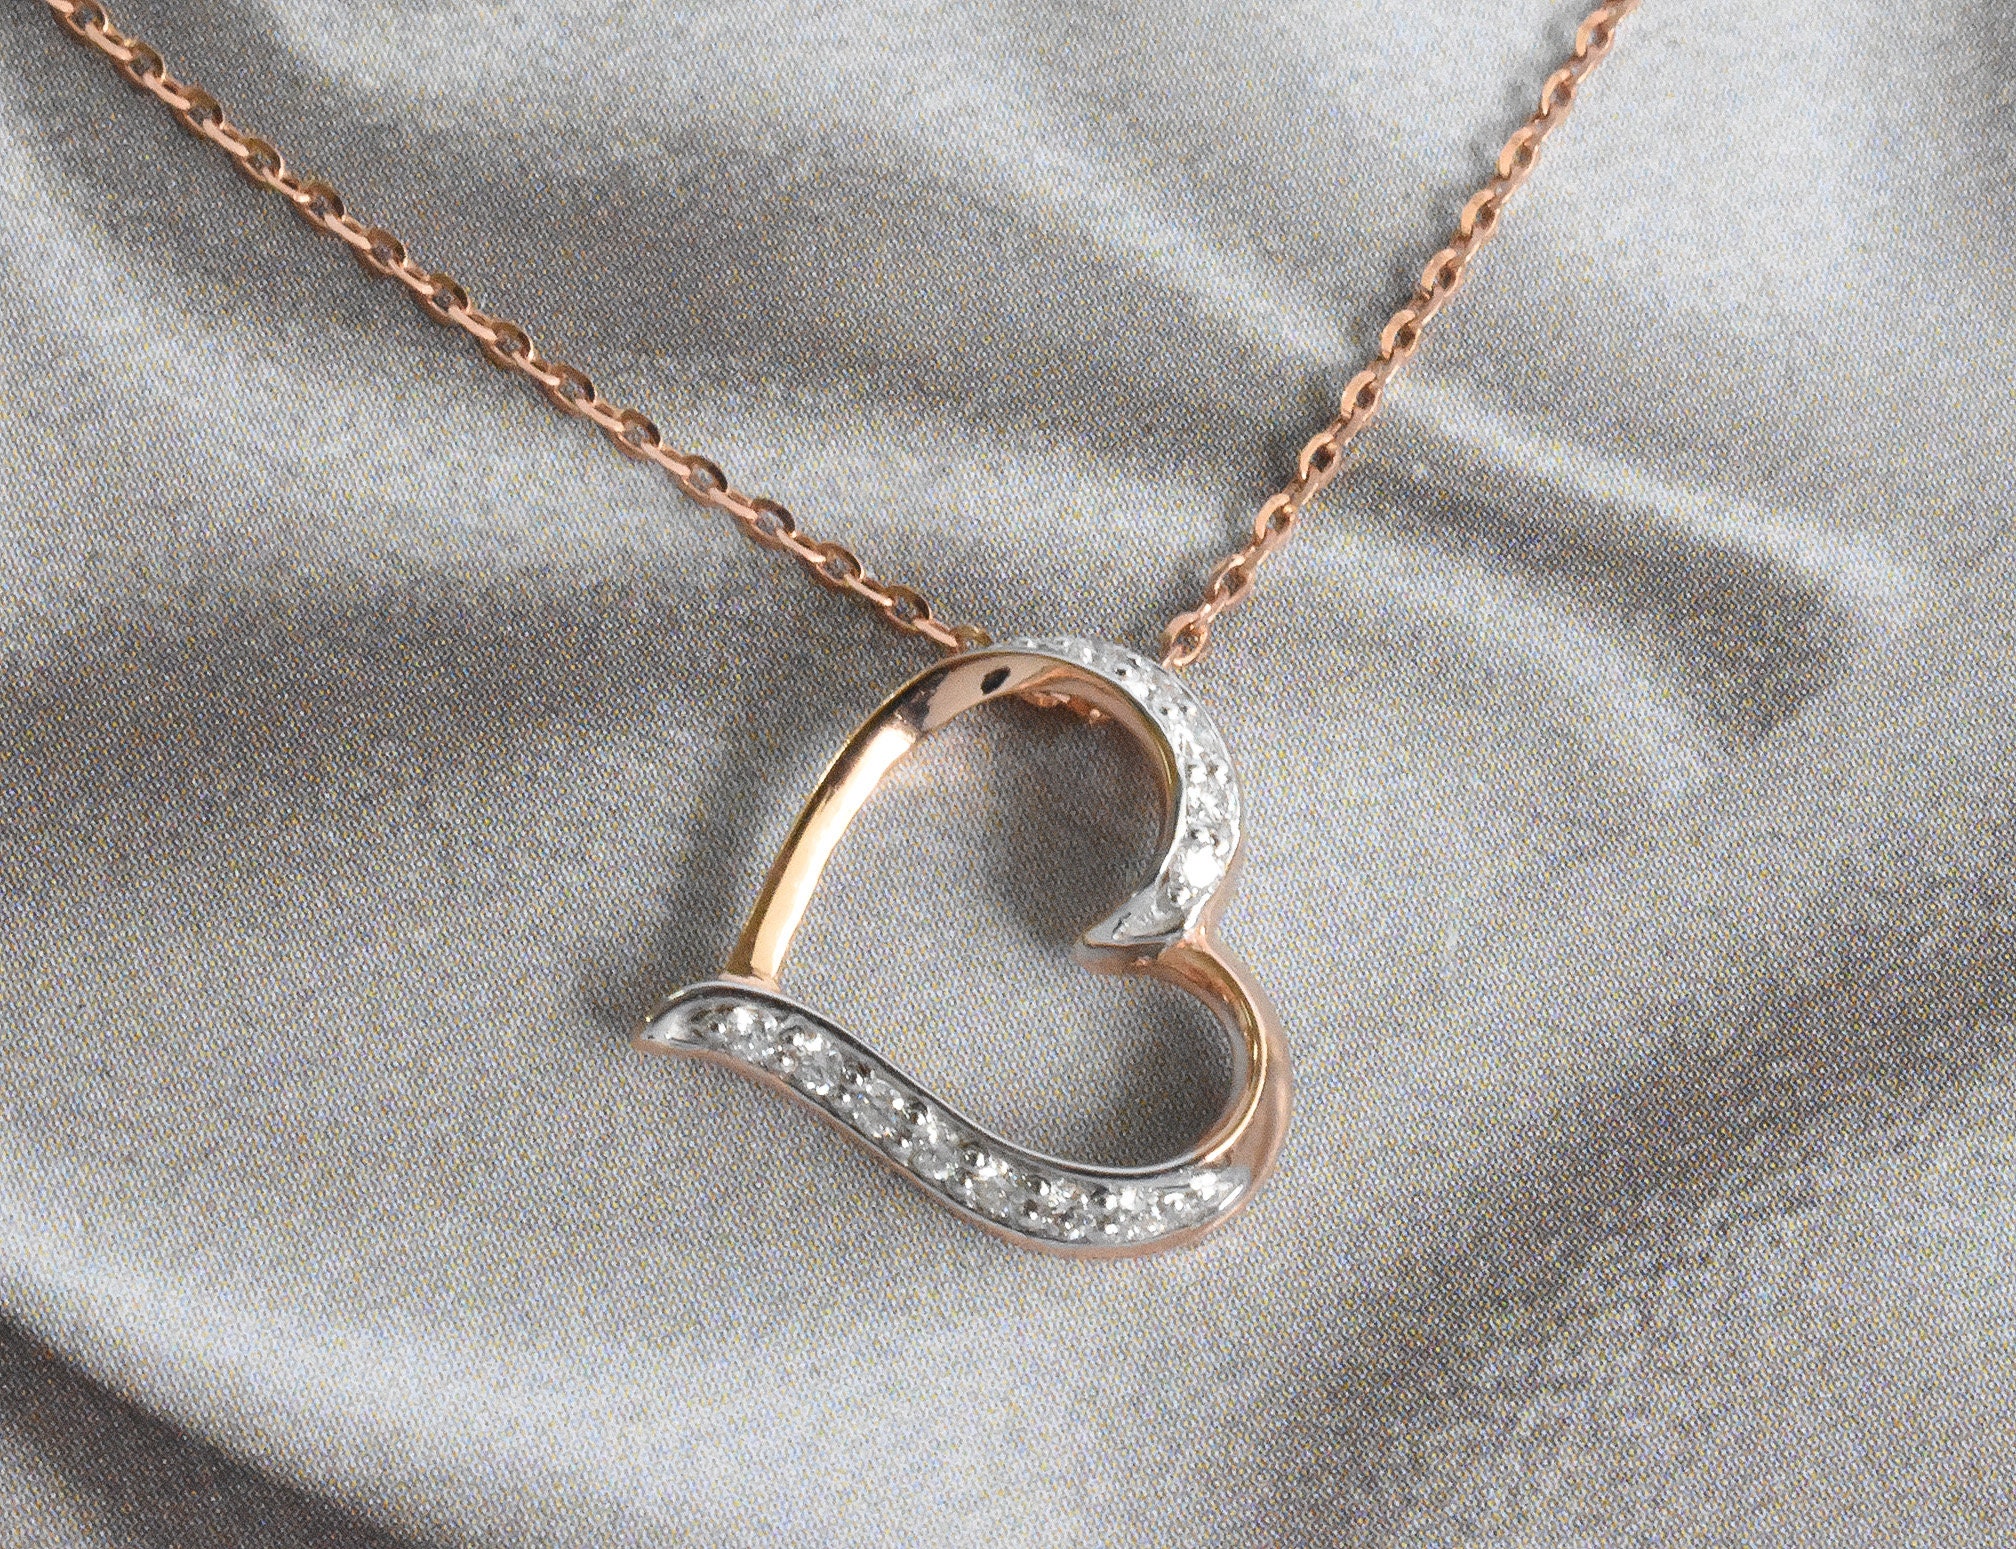 10K 14K 18K Gold Diamond Heart Pendant Necklace/Valentine Jewelry Gift Micro Pave Love Gift For Her